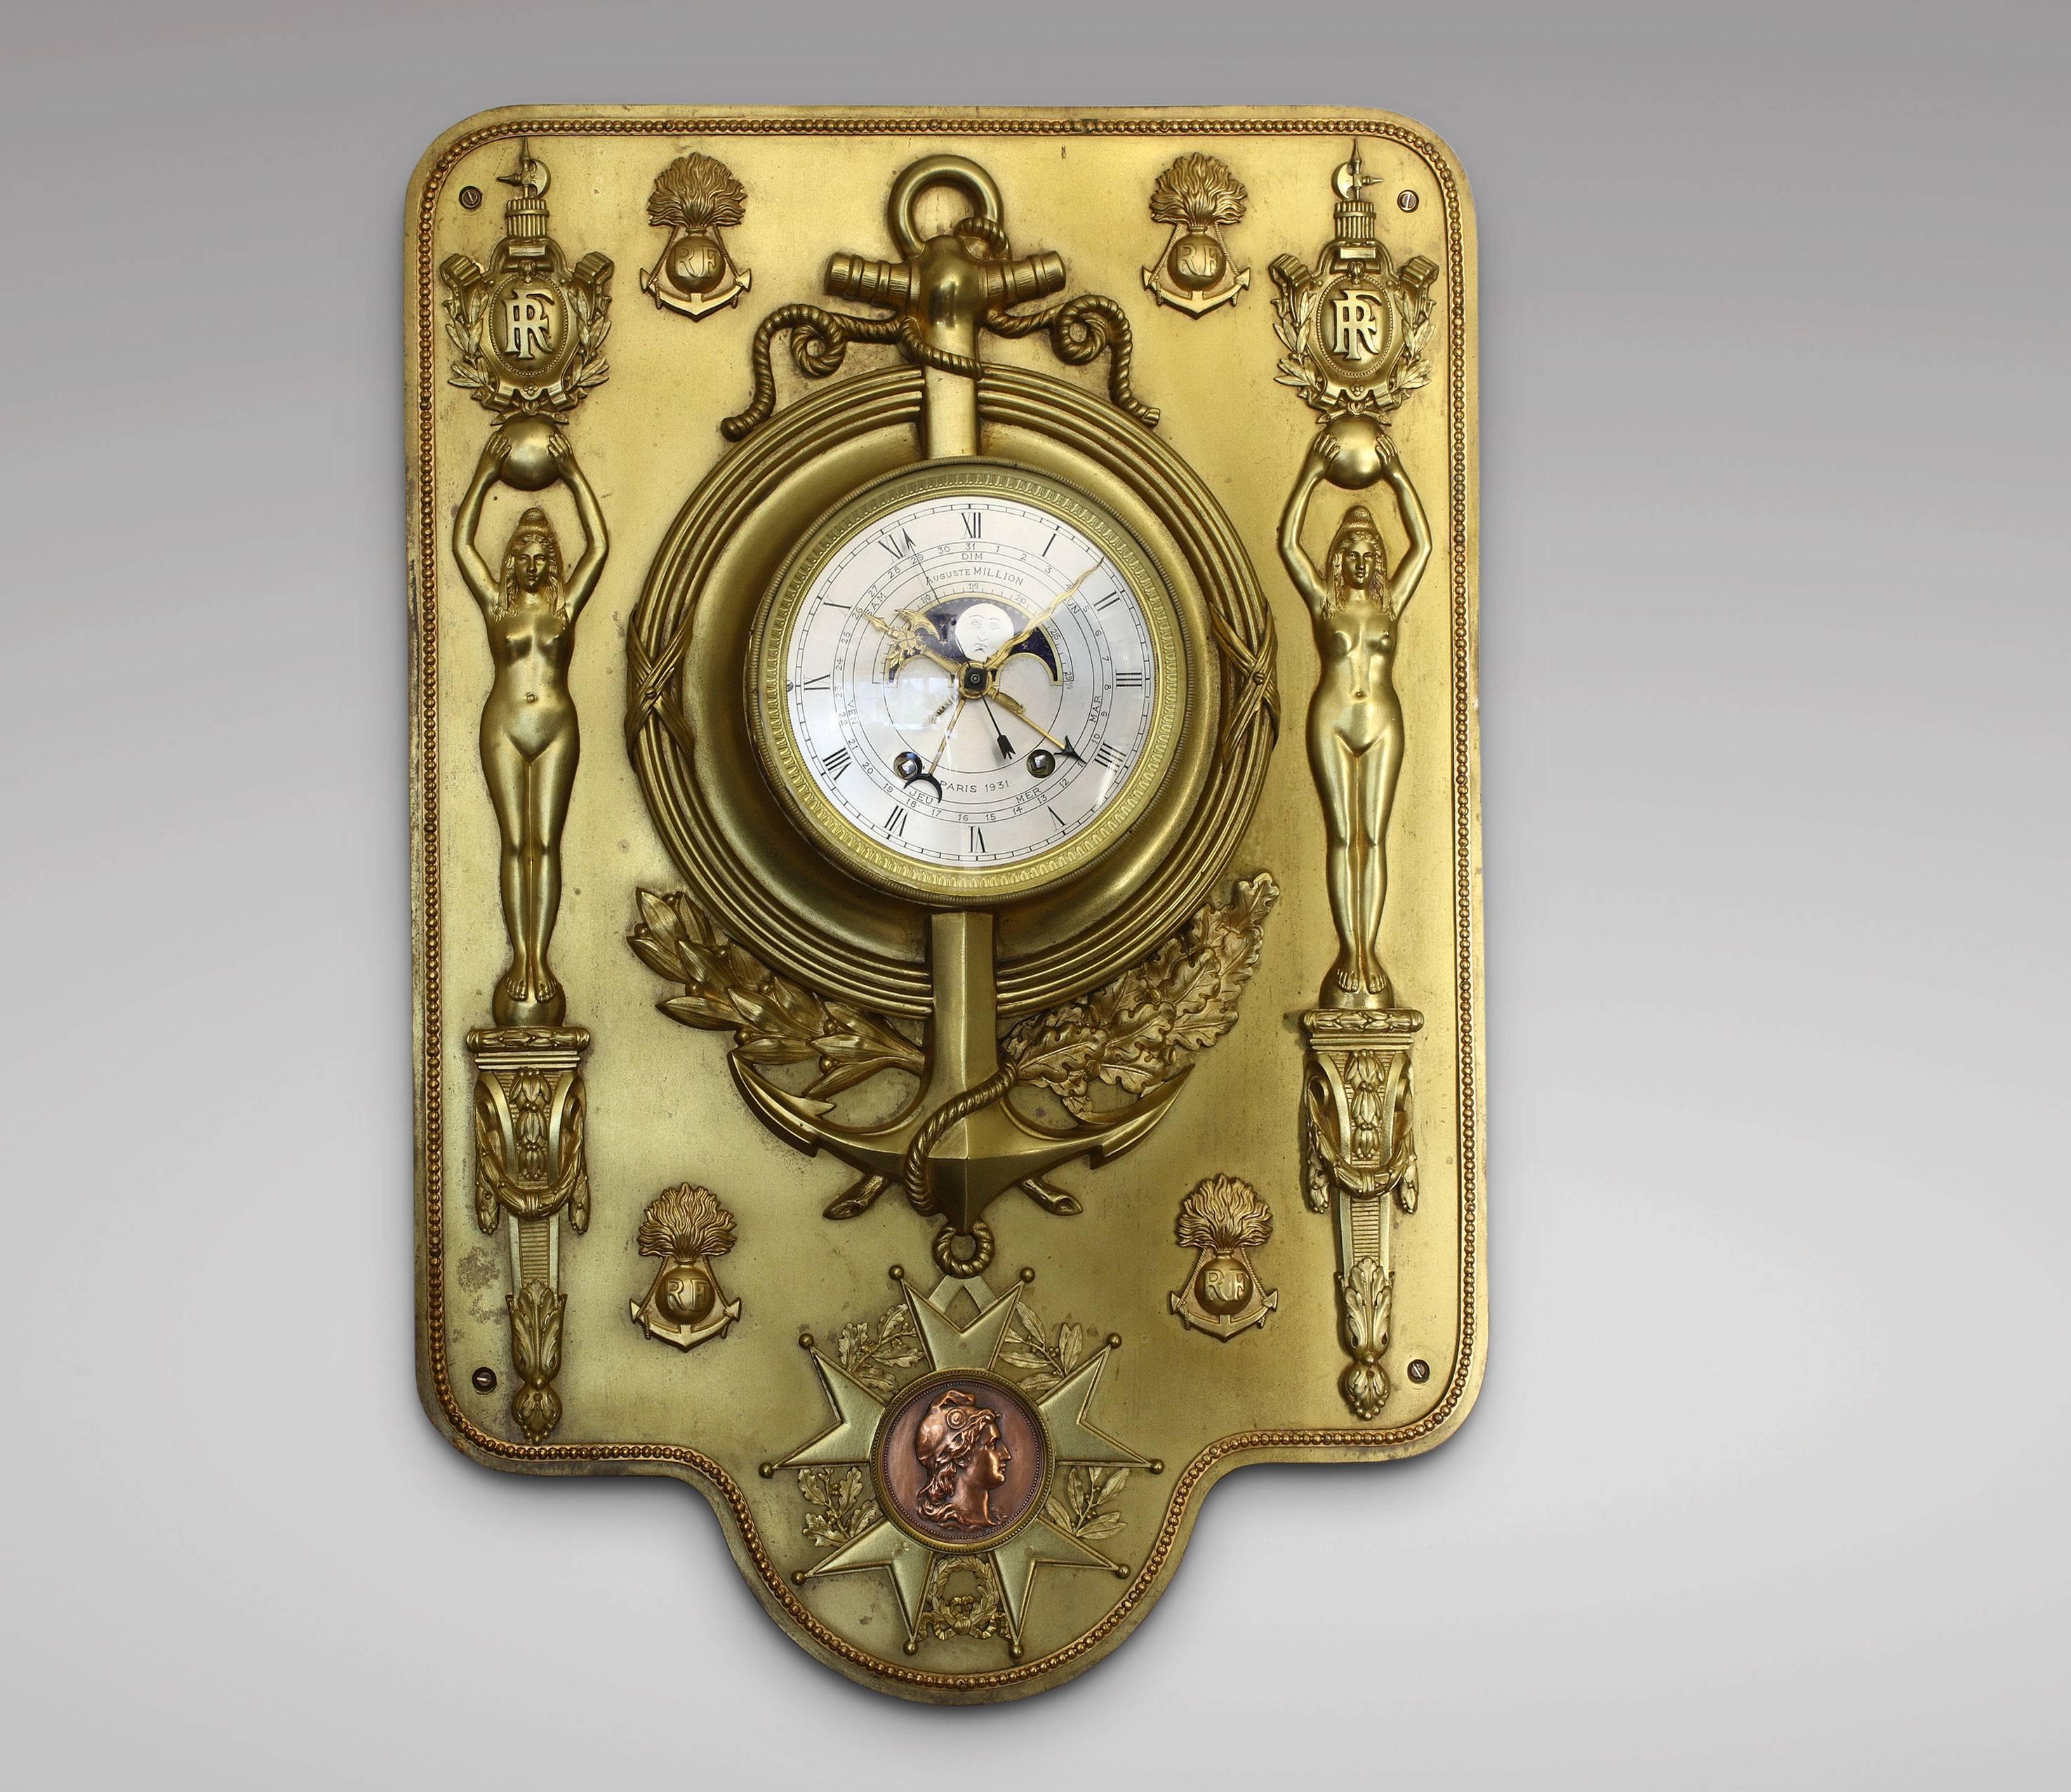 French Colonial Infantry Cartel clock, bronze with two-tone patina, the dial signed Auguste Million, Paris, 1931. Designed in the shape of a badge, the clock dial is transected by an anchor suspending the Cross of the Legion of Honour and flanked by